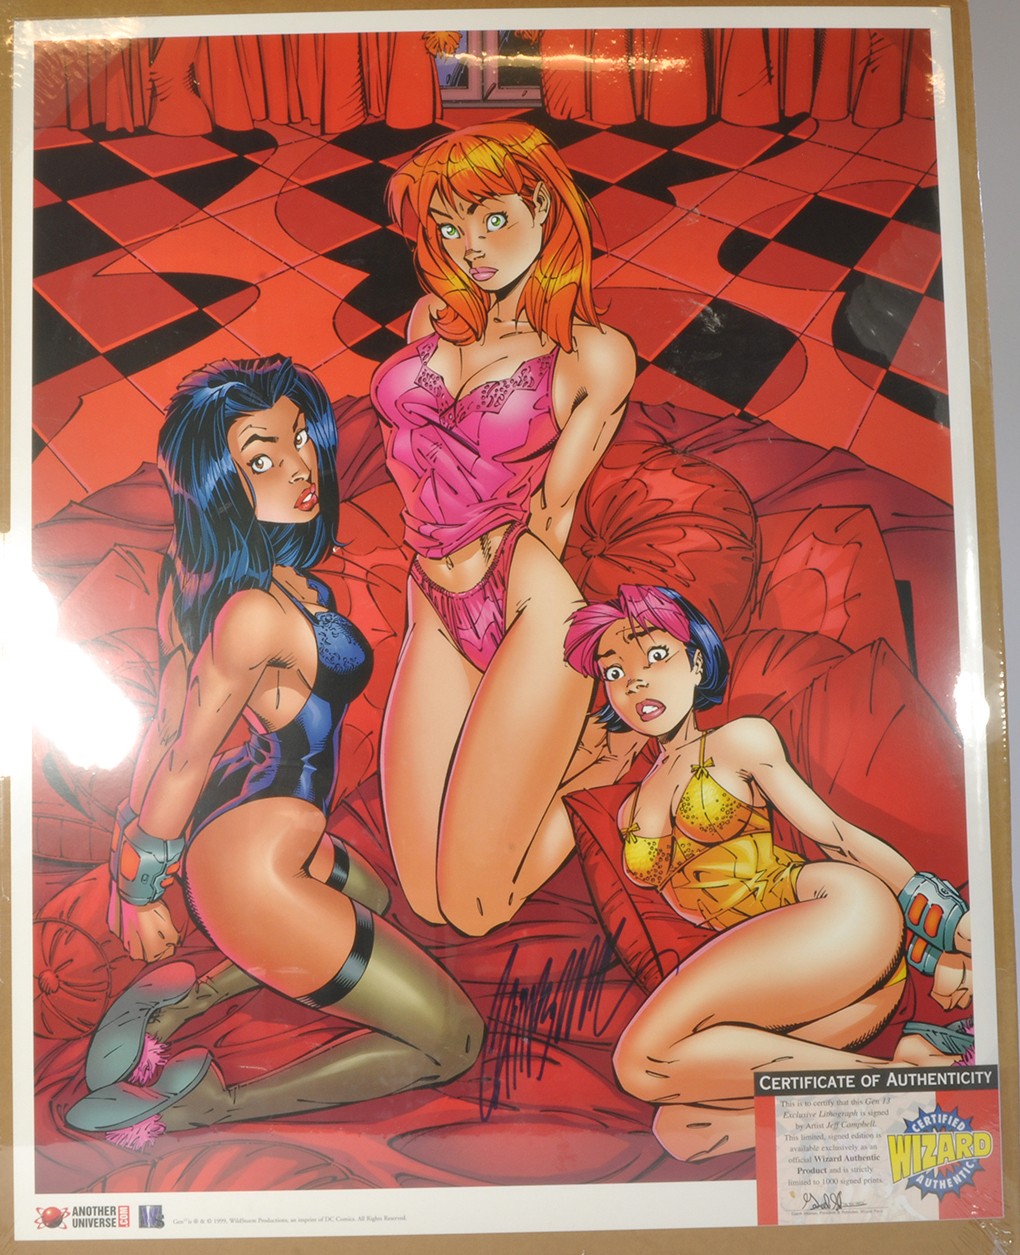 A Limited Edition Signed (large) Artwork Print depicting GEN 13 by Jeff Campbell.